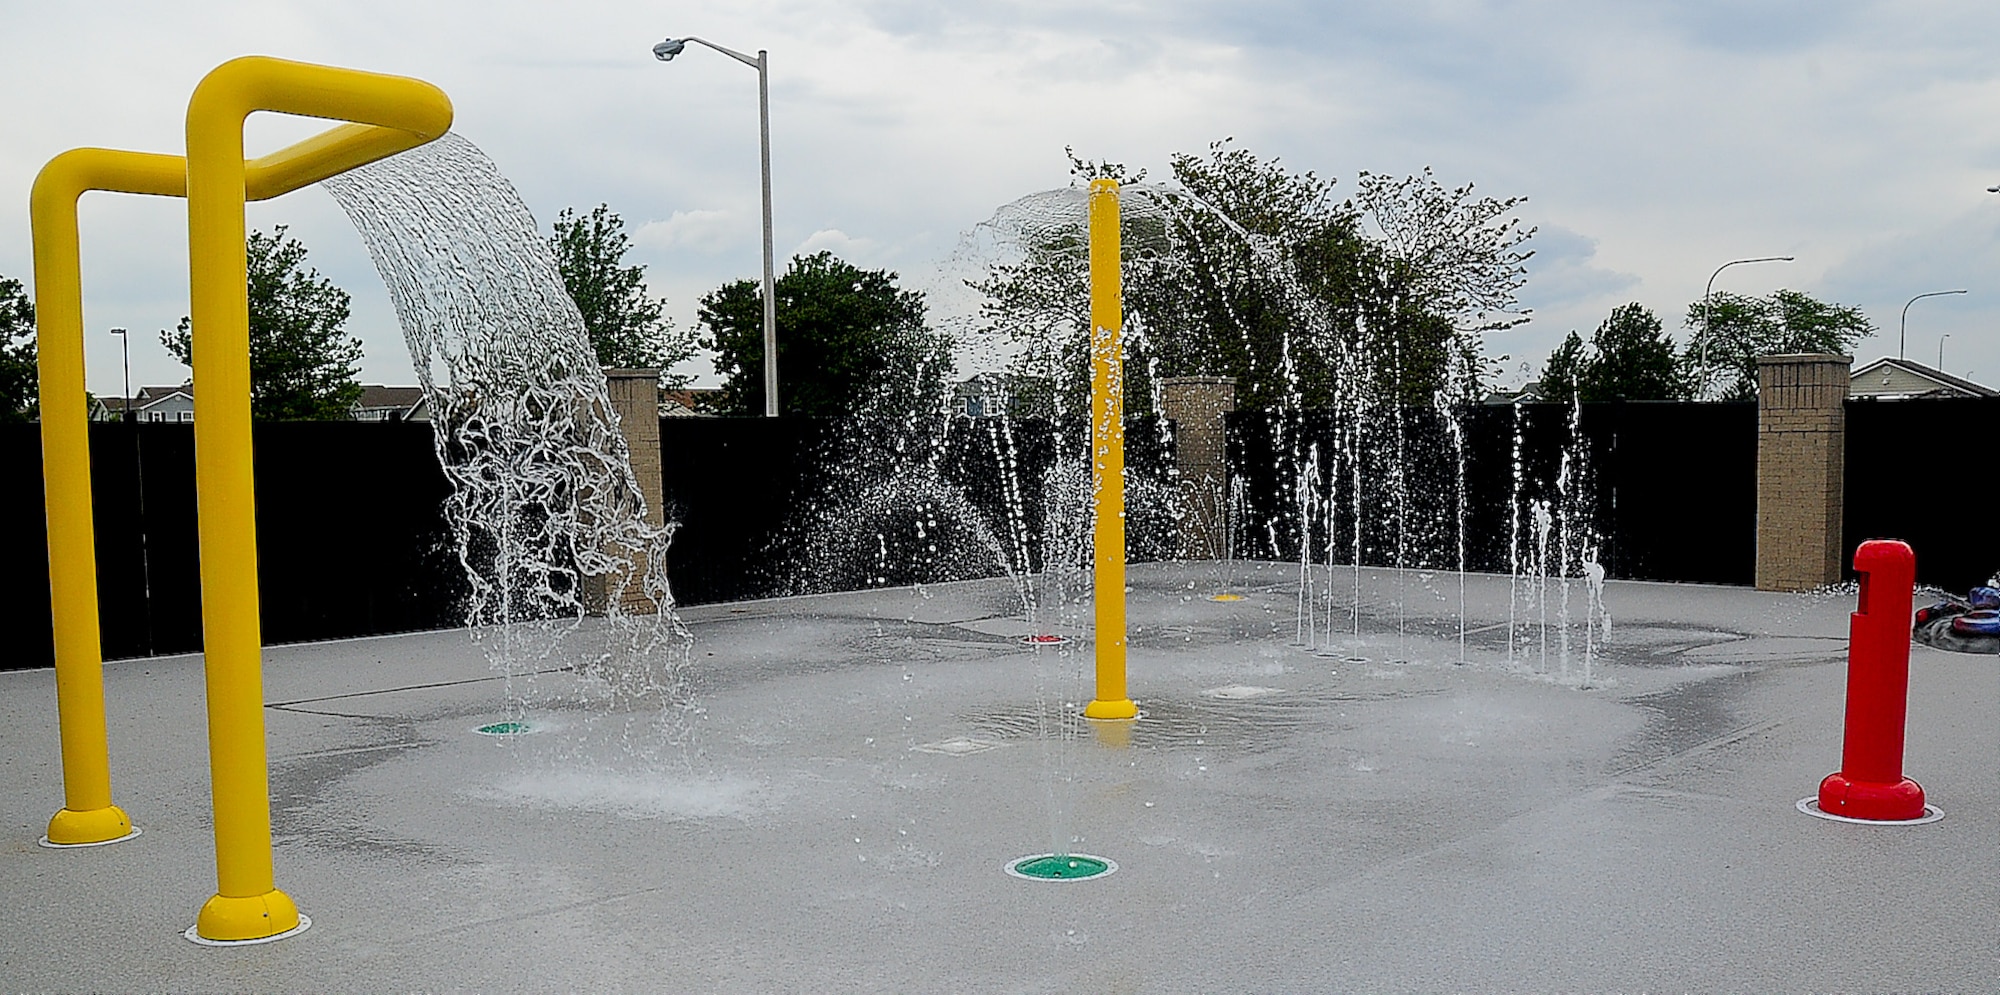 The splash pad, the newest addition to the Oasis Pool, is tested May 16, 2013, at Dover Air Force Base, Del. The pool is scheduled to open May 24. (U.S. Air Force photo/Airman 1st Class Ashlin Federick)